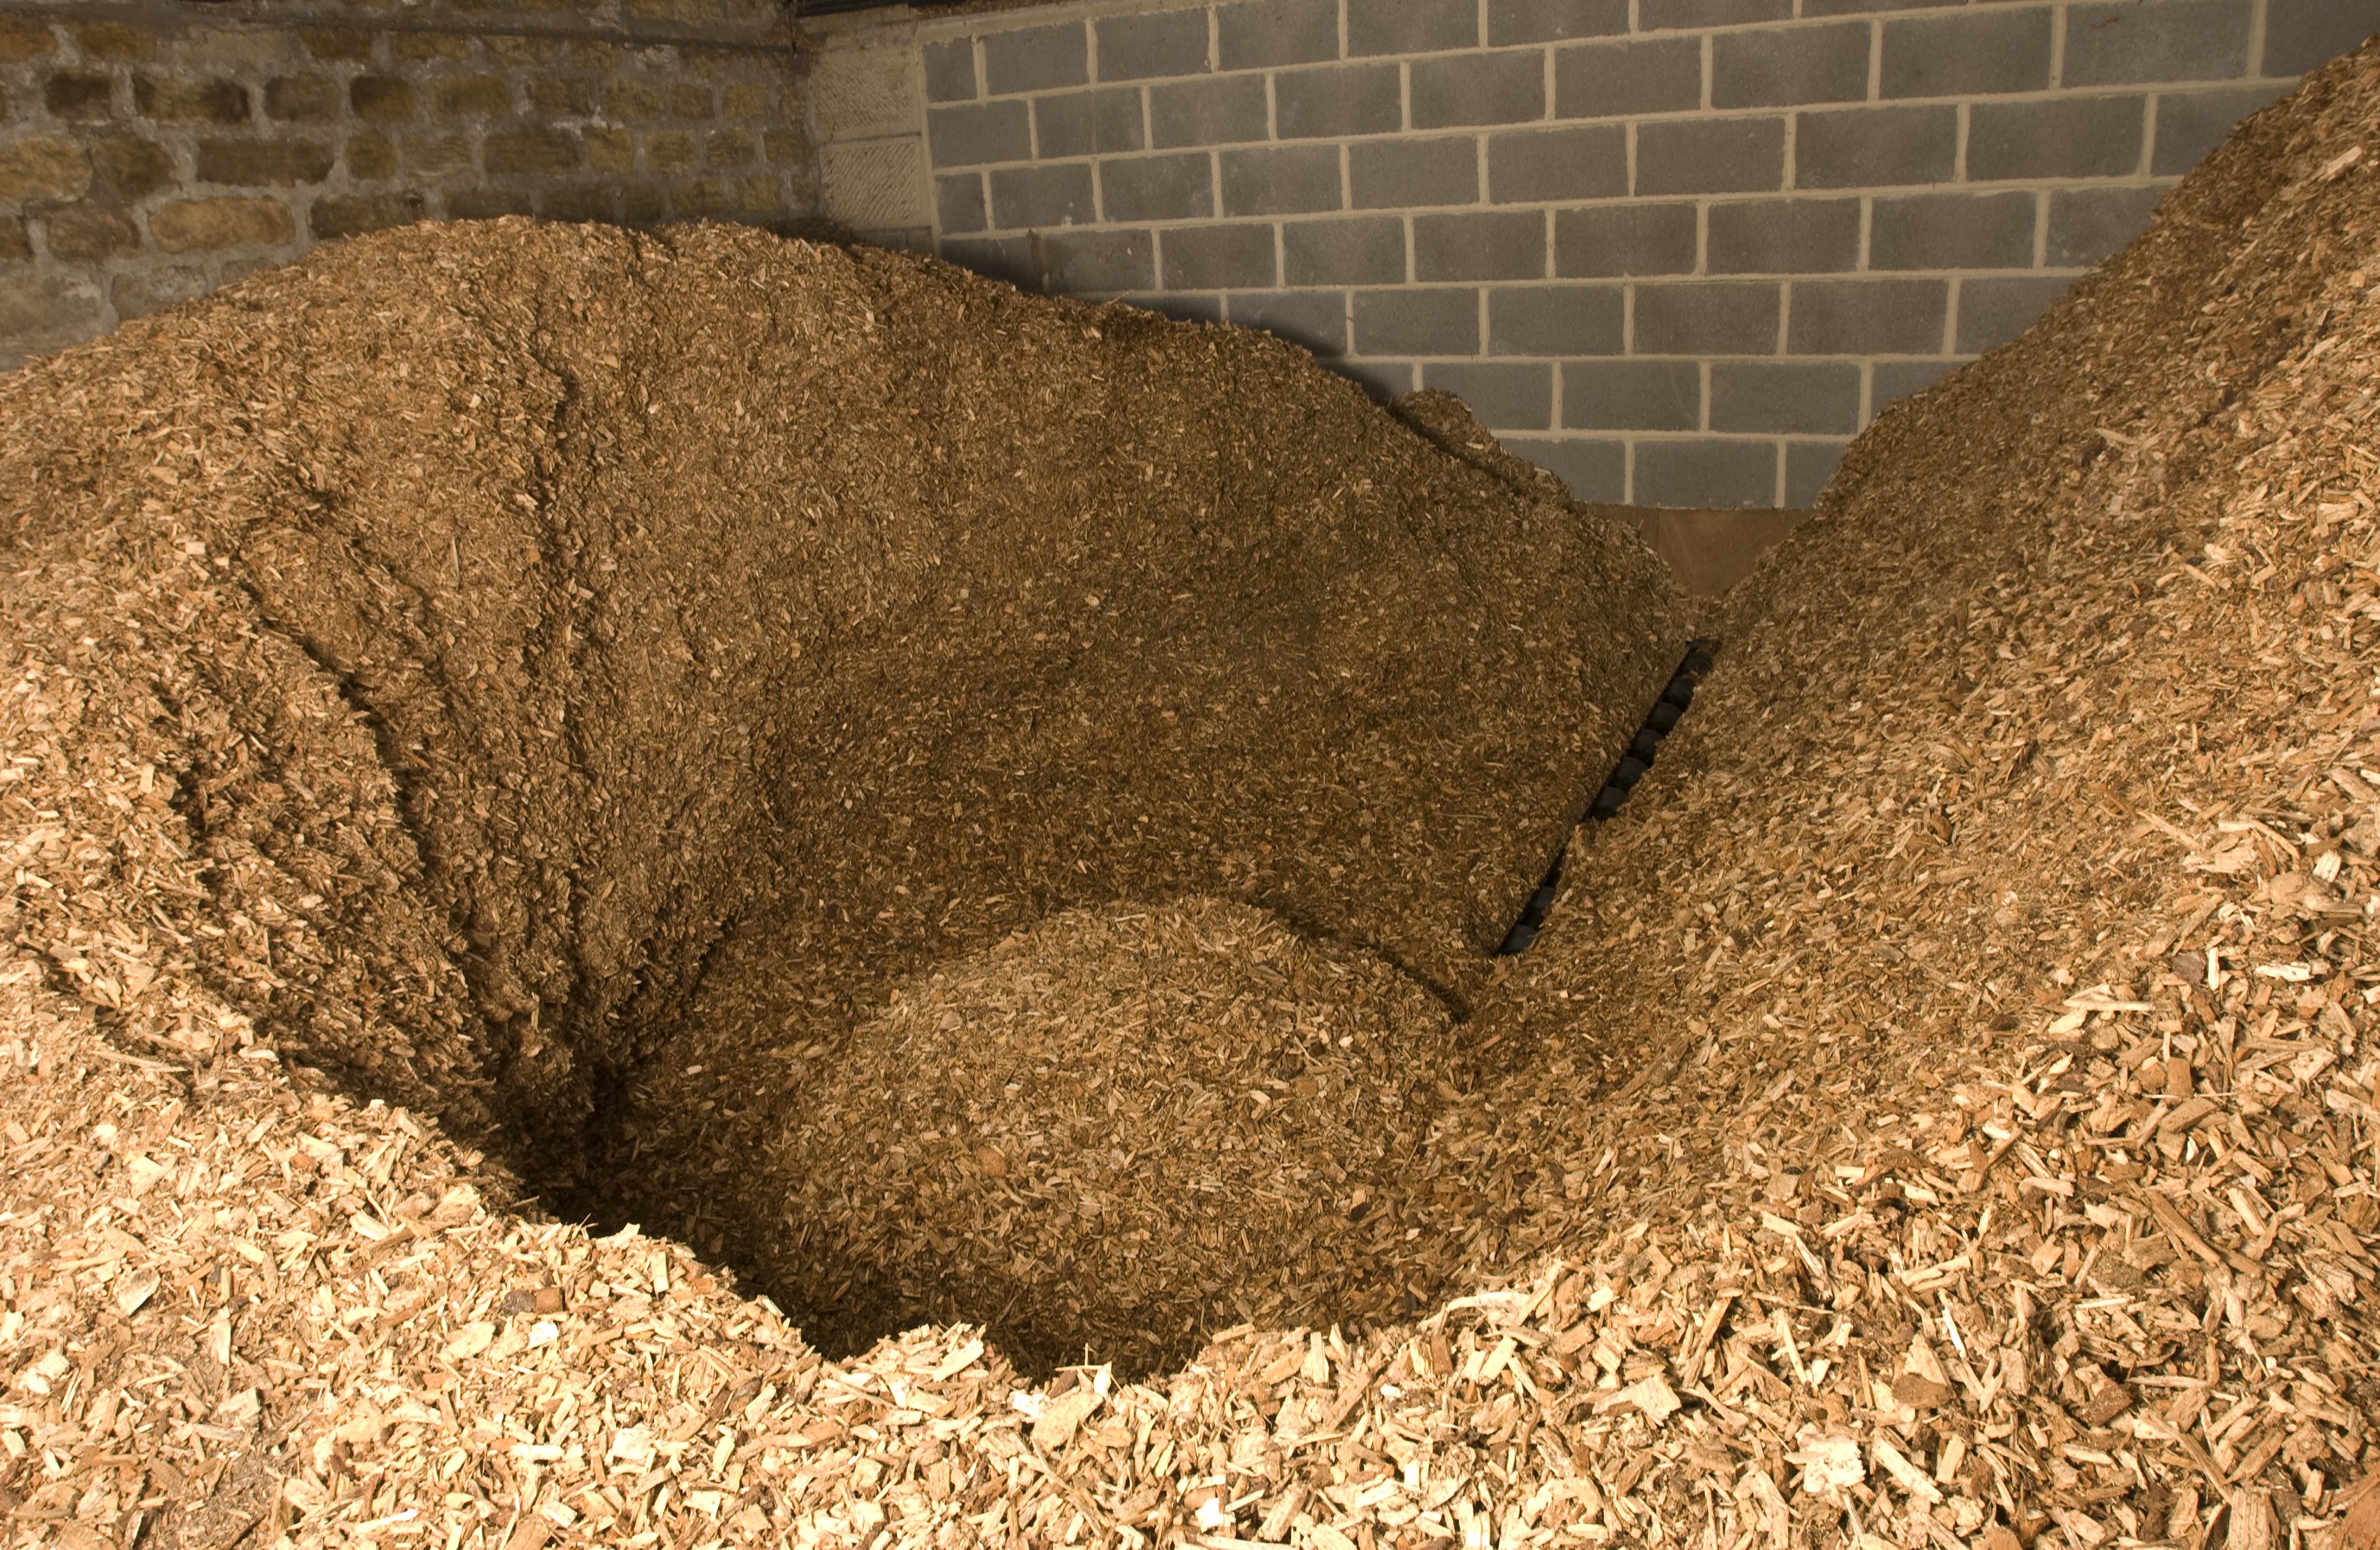 A large collection of wood chips mounded in a room with exposed brick walls. 